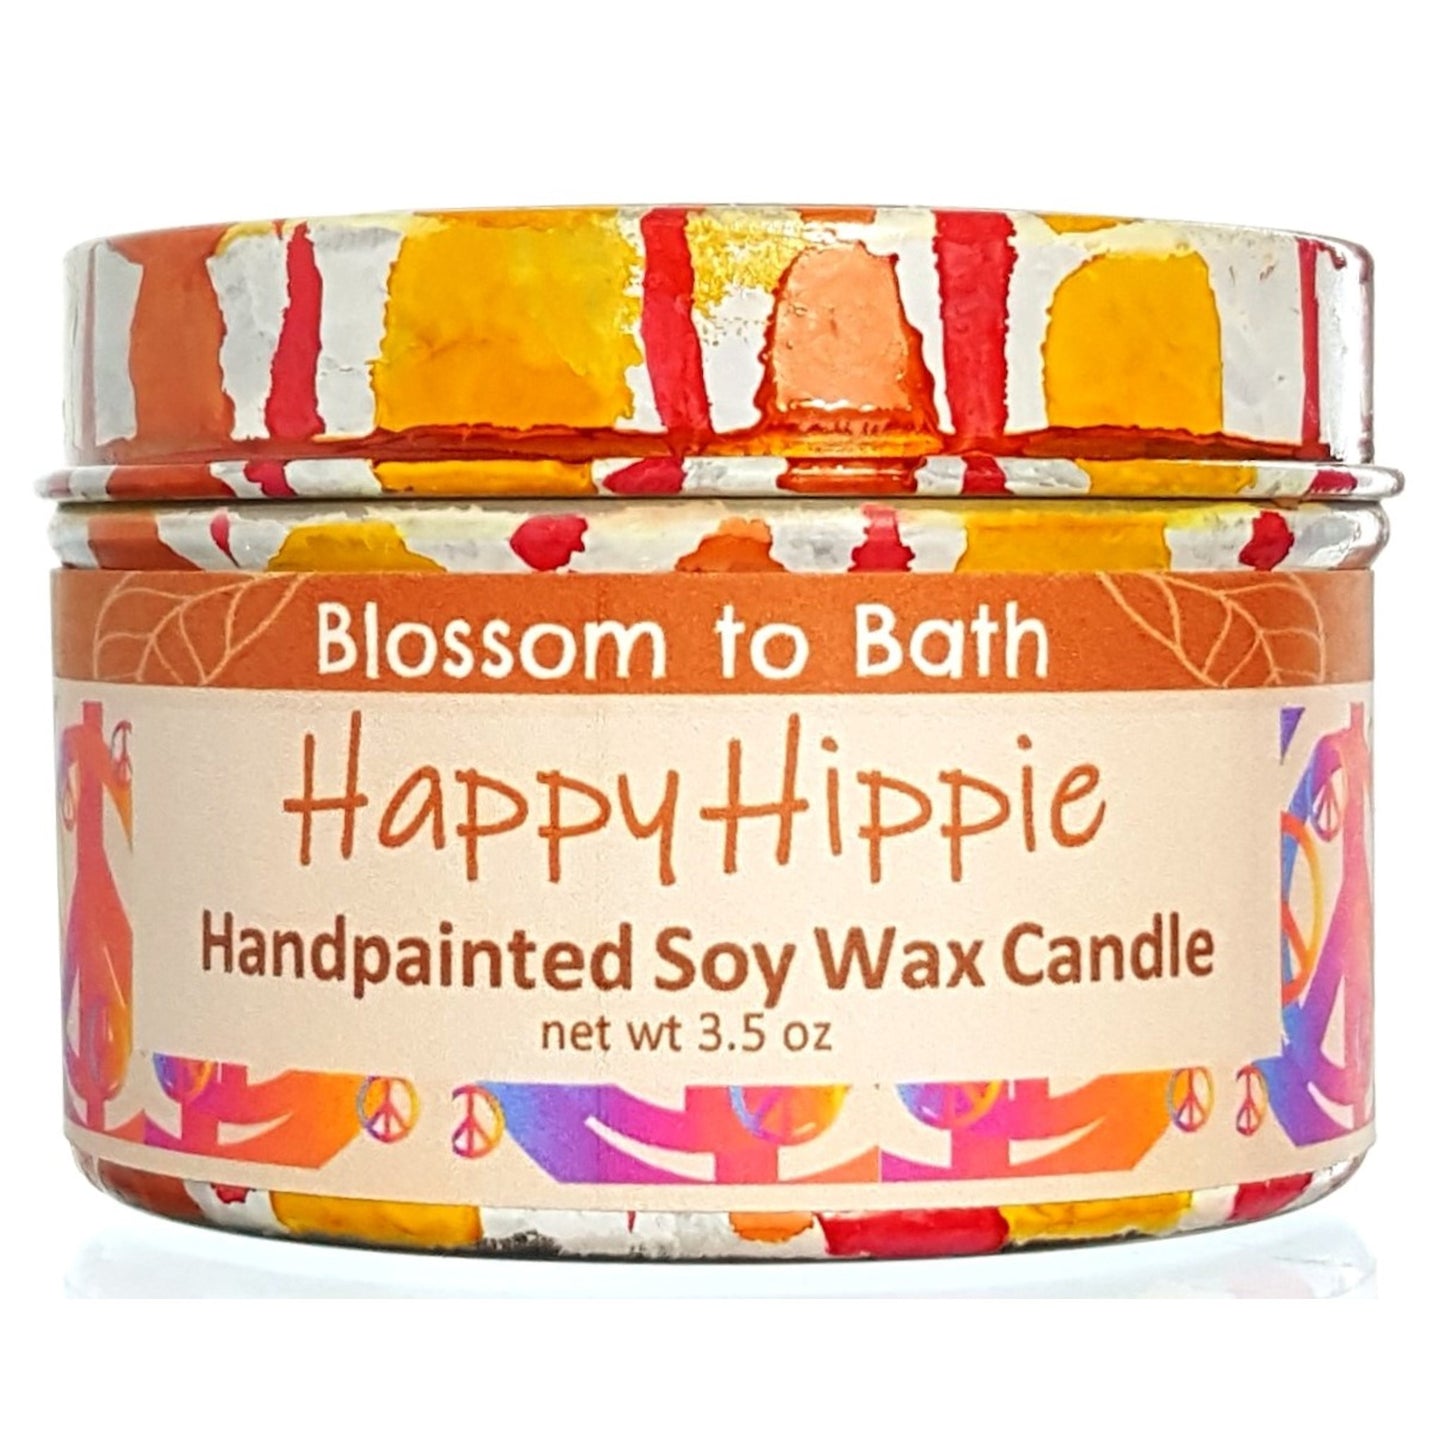 Buy Blossom to Bath Happy Hippie Handpainted Soy Wax Candle from Flowersong Soap Studio.  Enjoy one of a kind décor and fill the air with a charming fragrance that lasts for hours  A refreshing herbal fragrance that elevates your mood and your perspective.